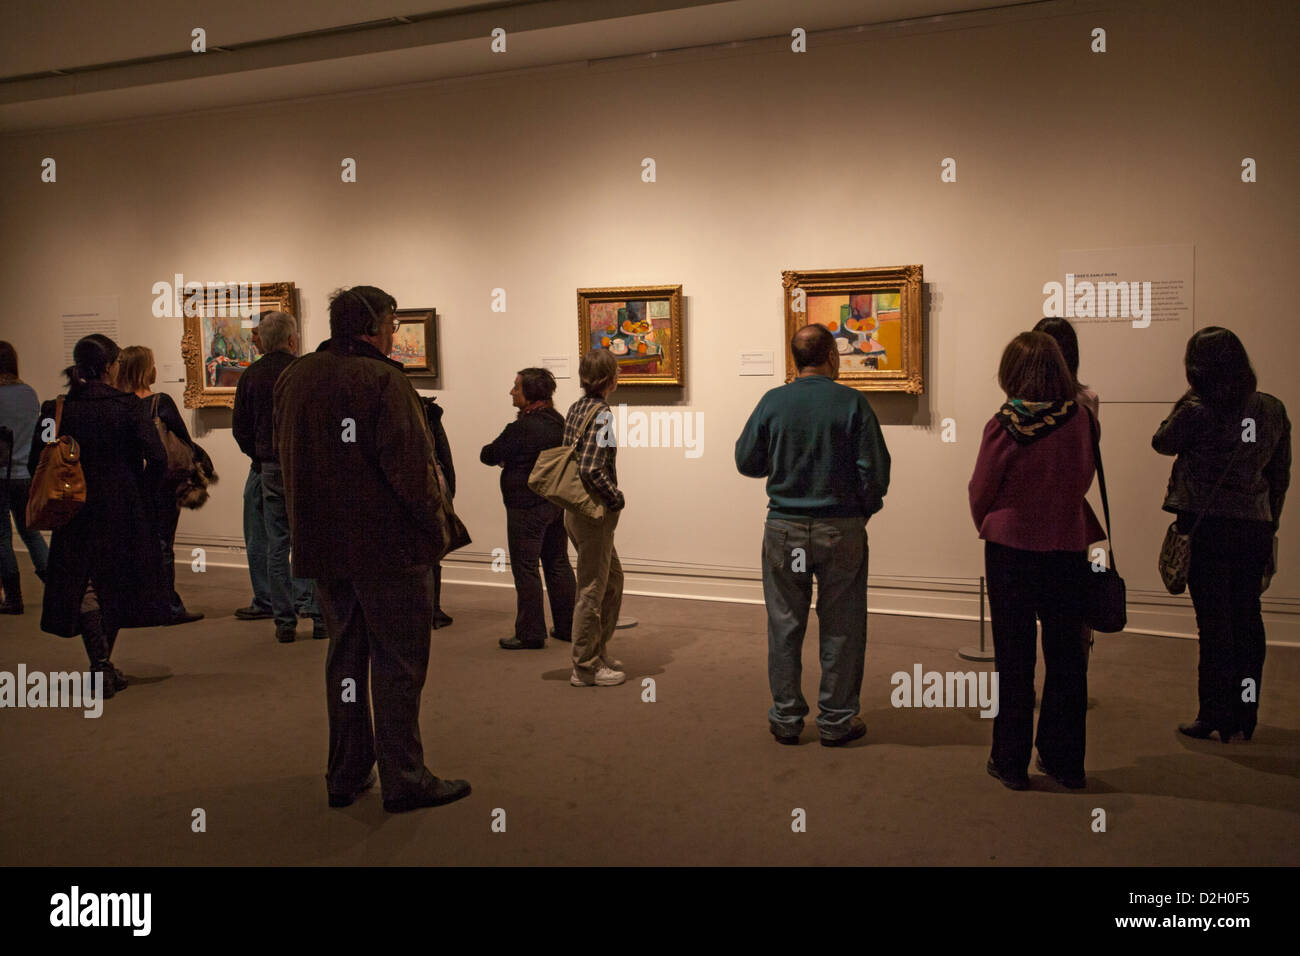 Museum goers view a Matisse exhibit at the Metropolitan Museum of Art in New York City. Stock Photo